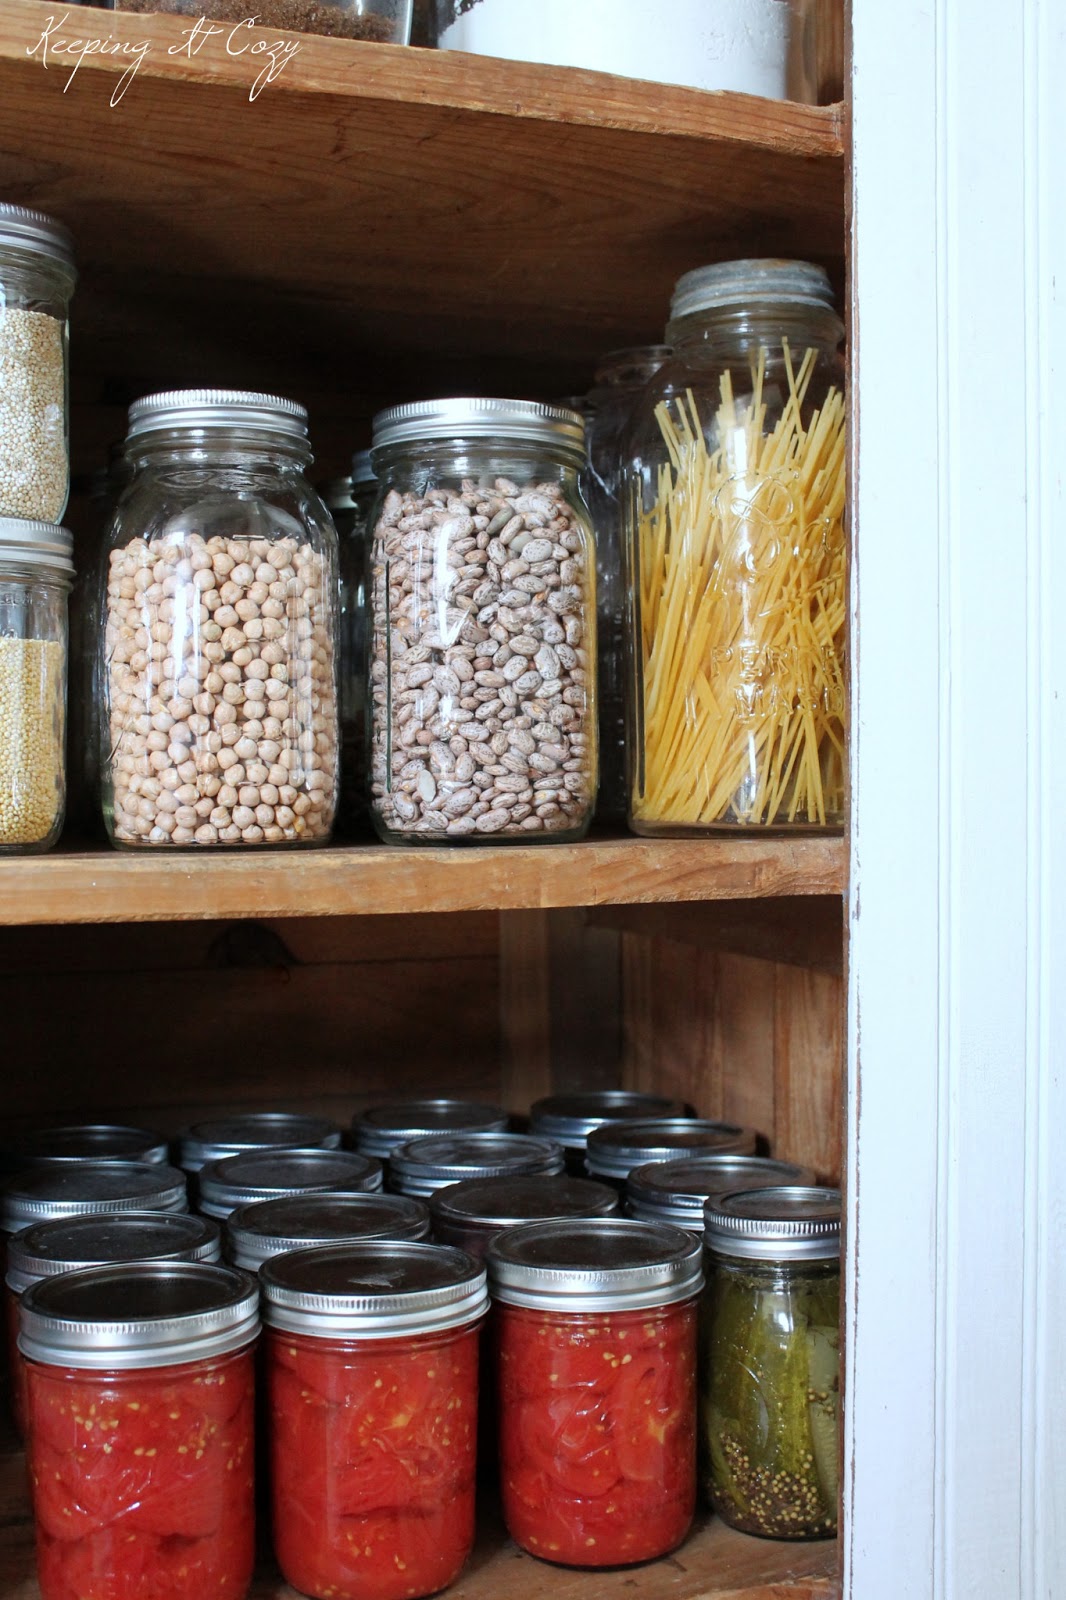 Keeping It Cozy Organizing A Pantry